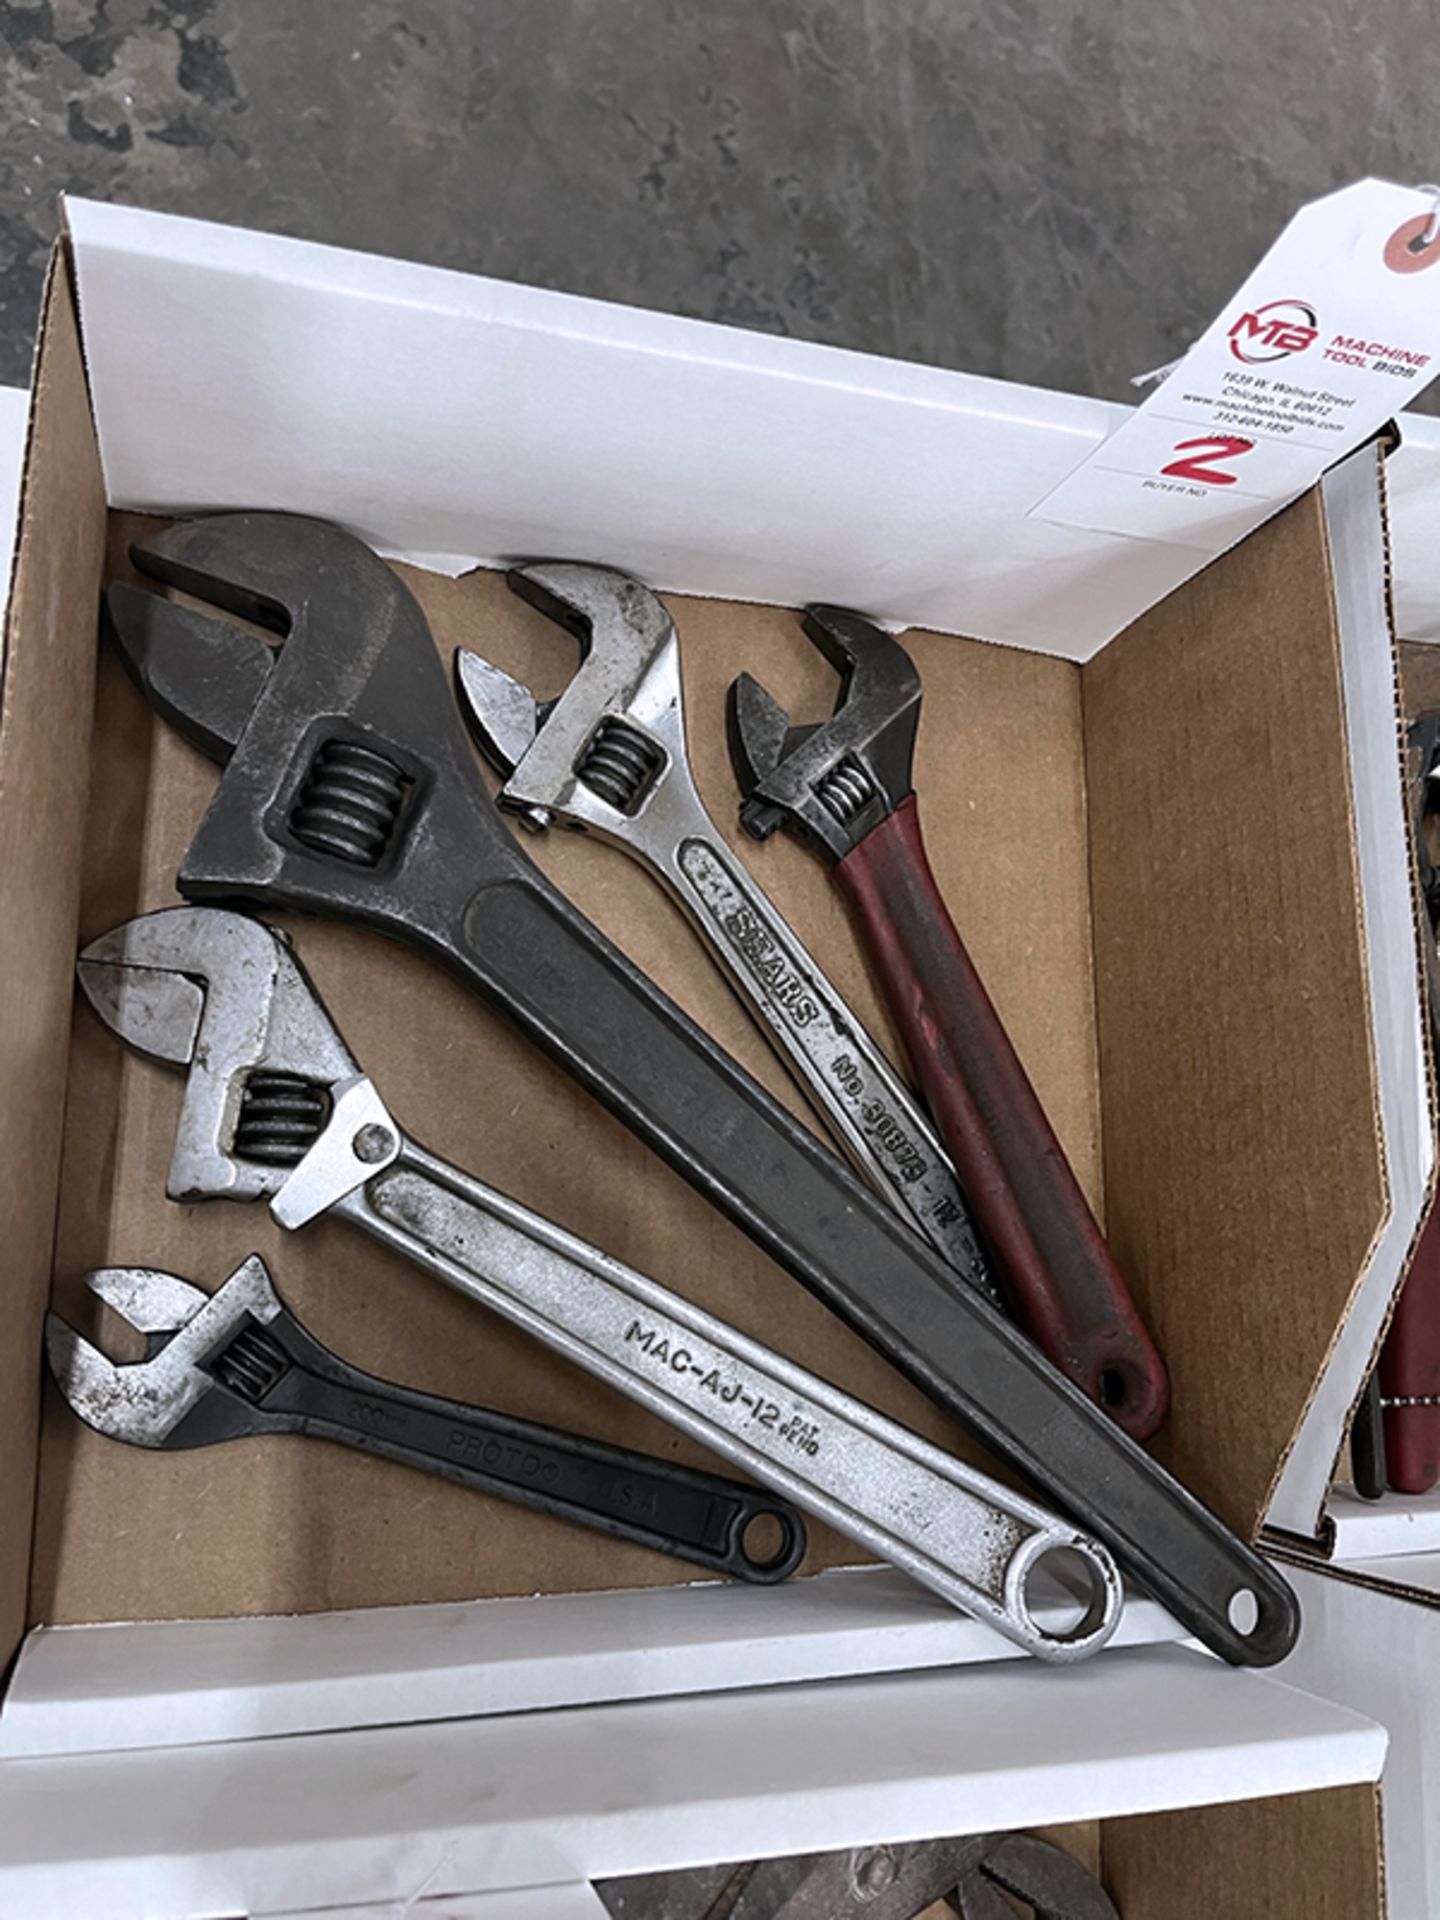 Crescent Wrenches - Image 2 of 3